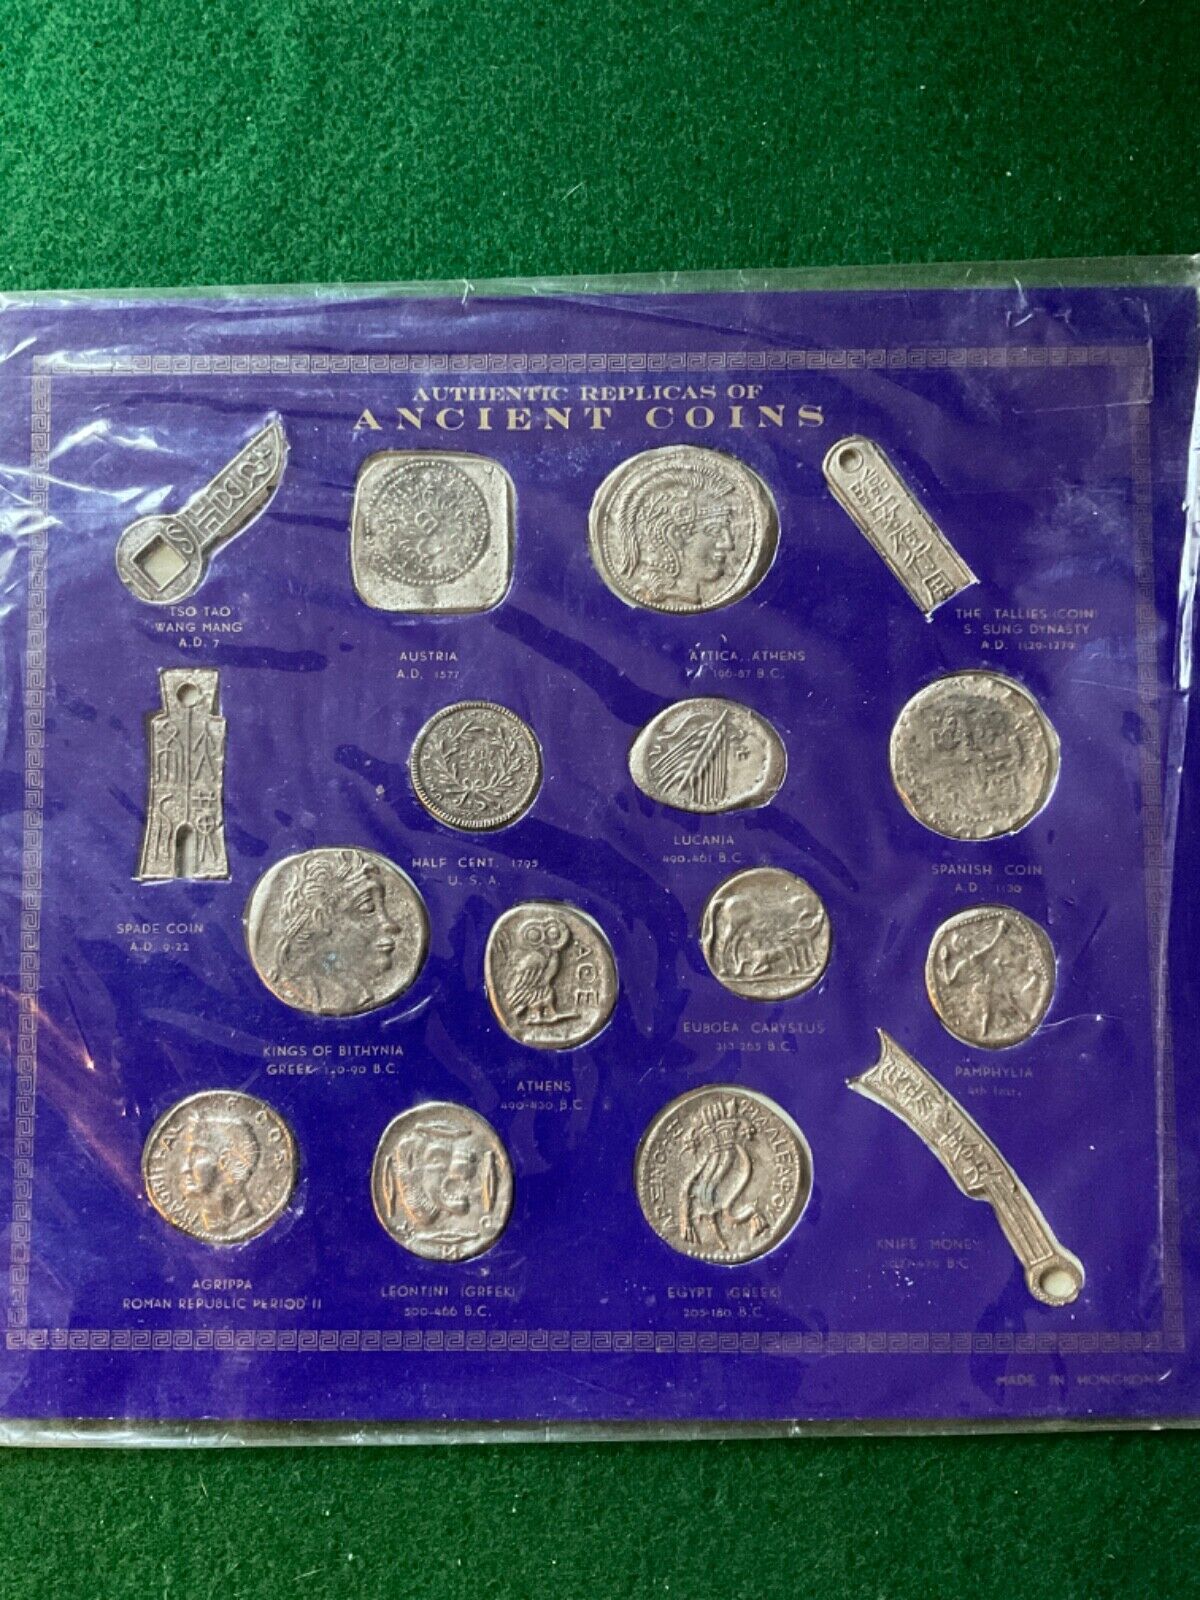 Authentic Replicas of Ancient Coins - T10